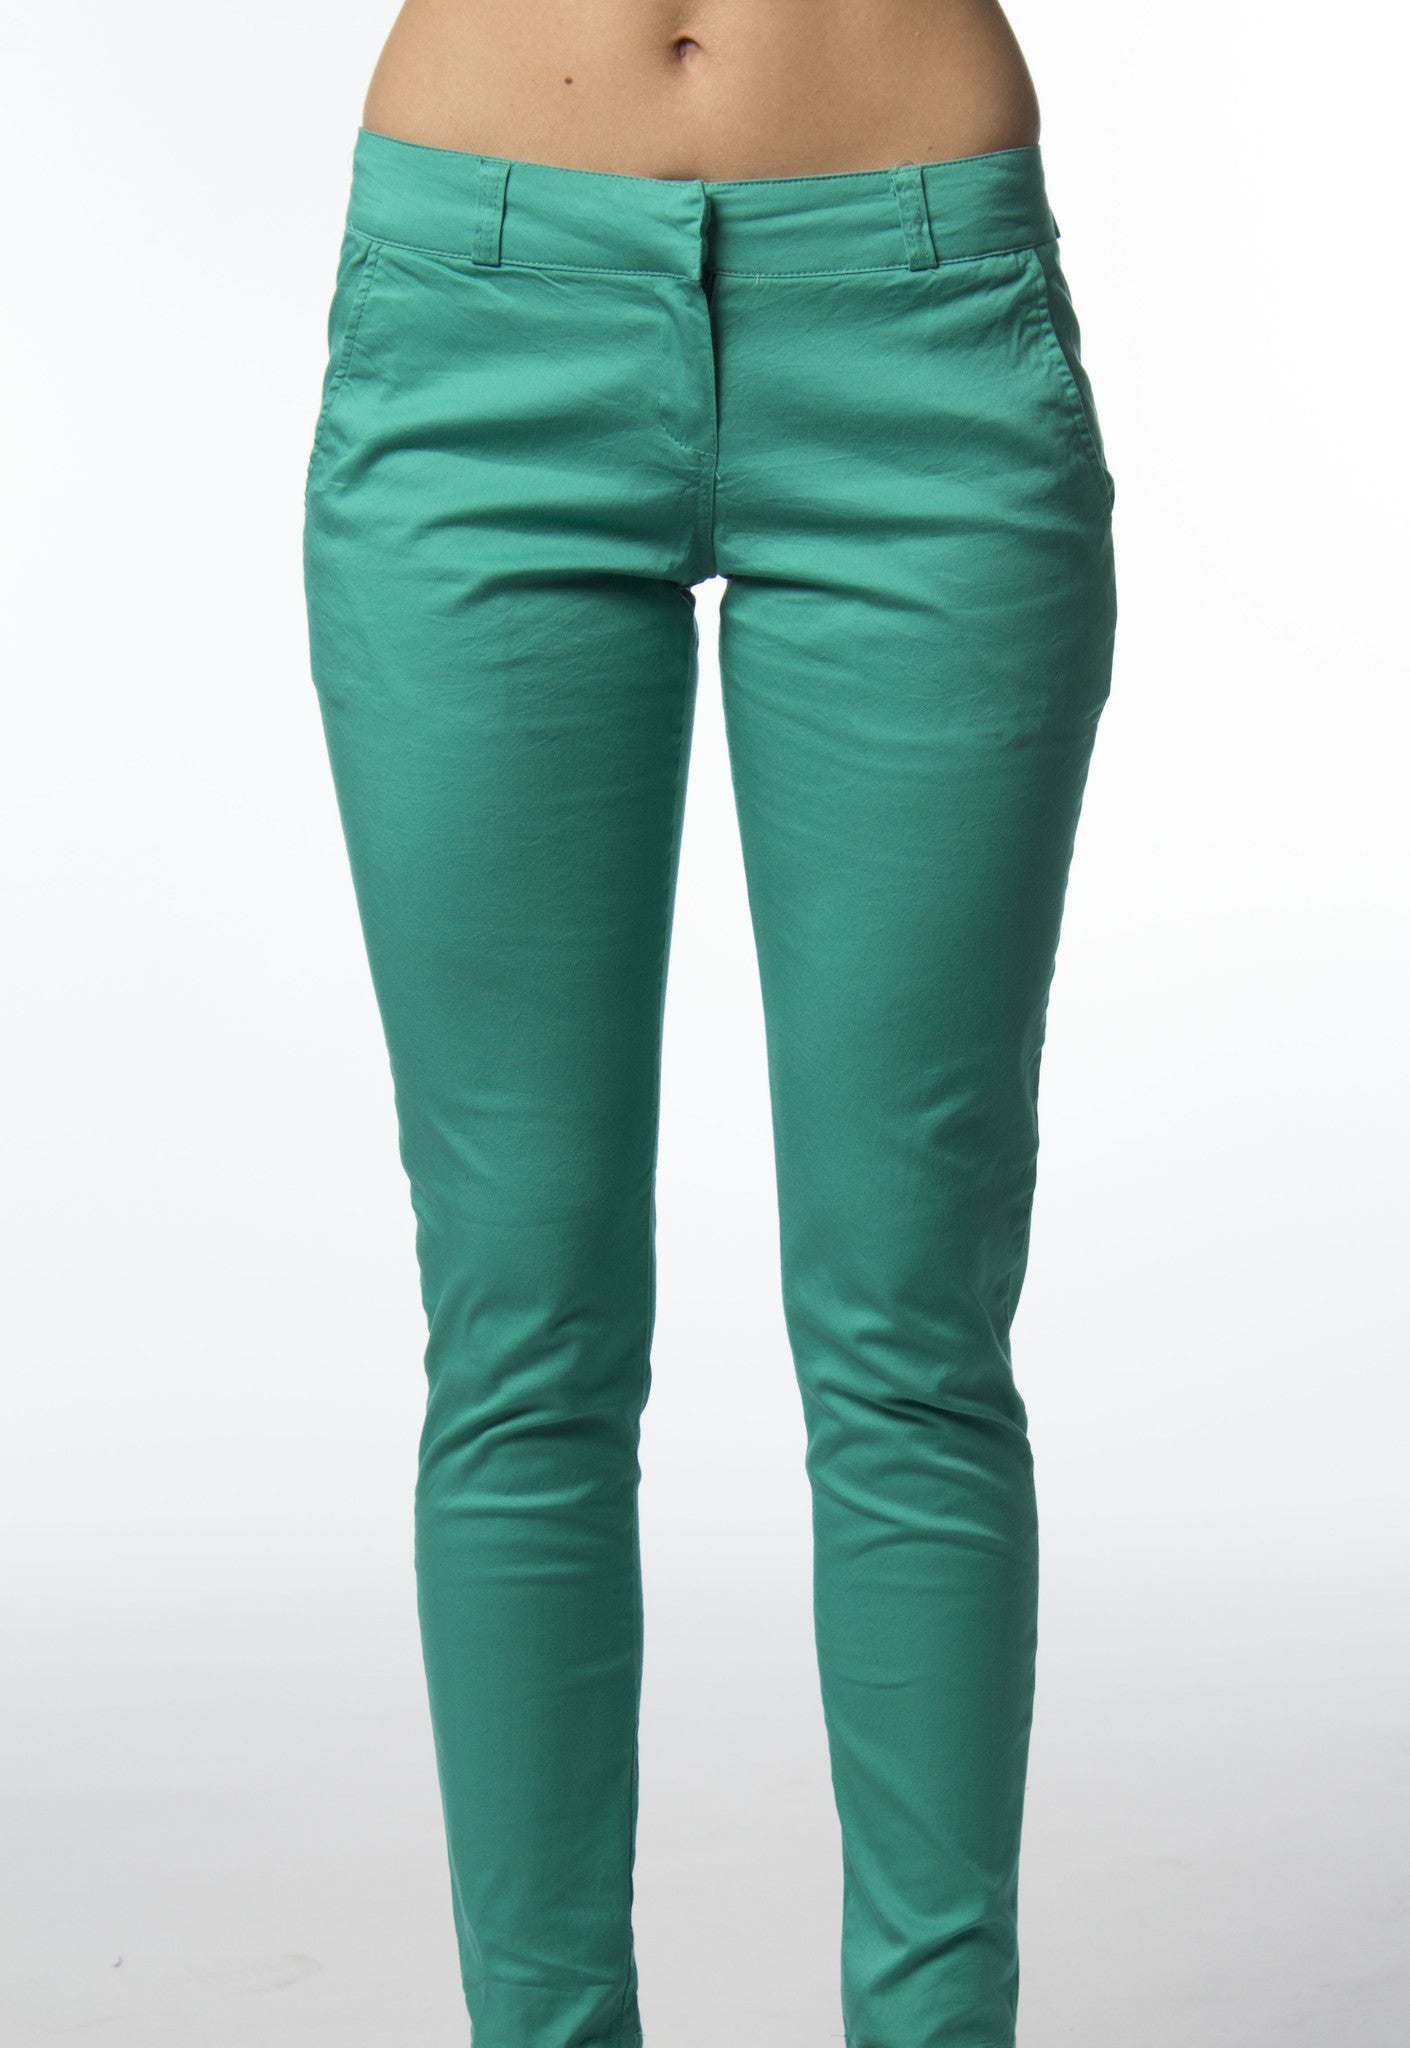 Cotton skinny pant in cool green color